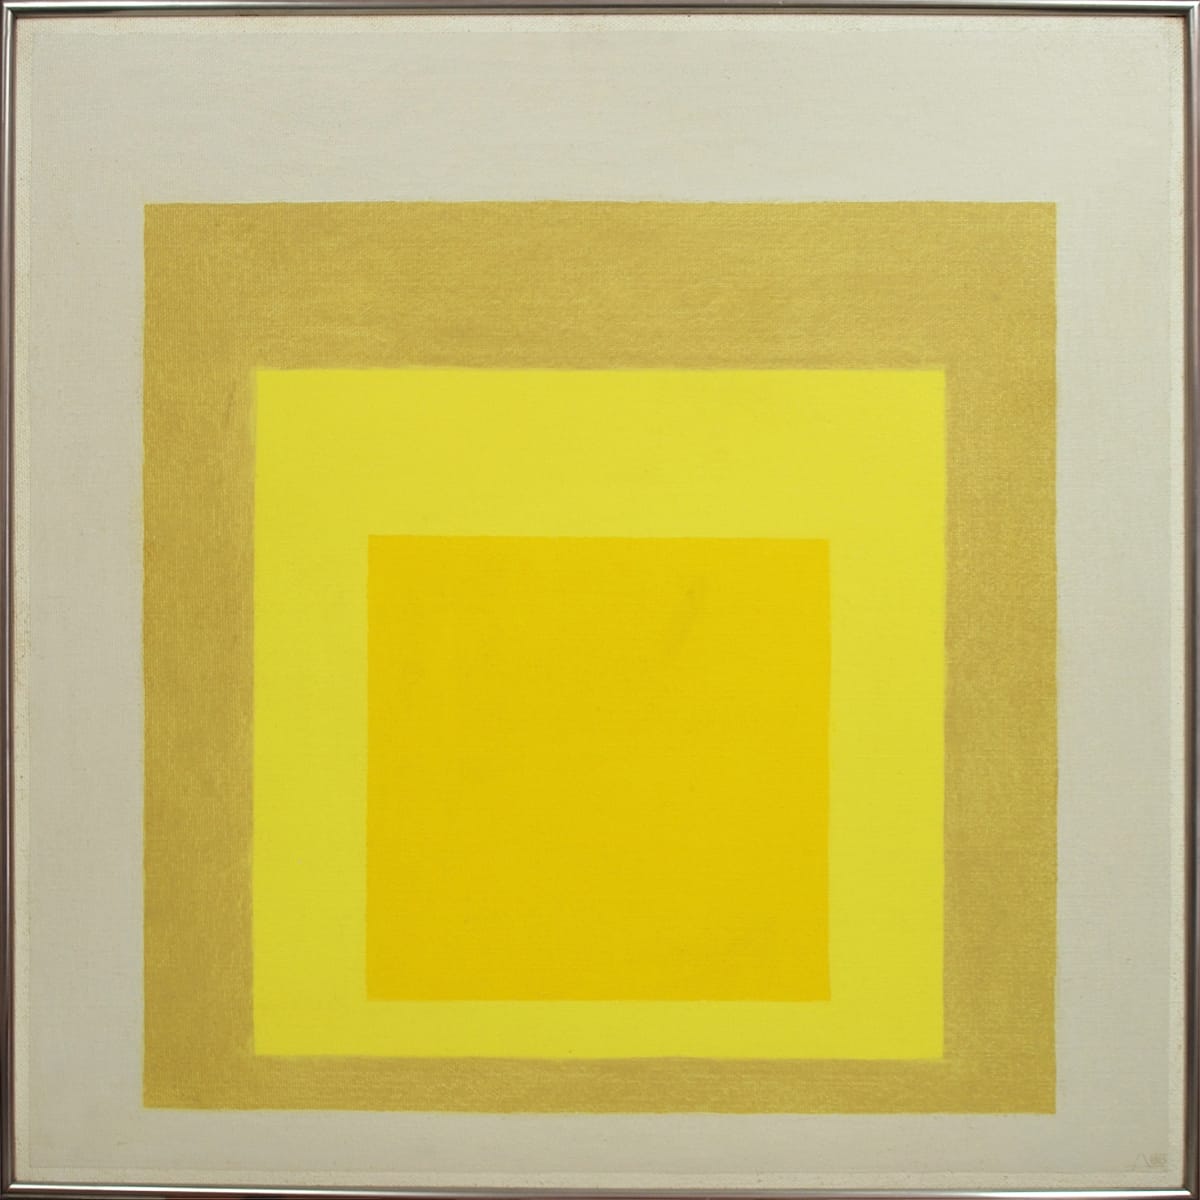 Study for Homage to the Square: Arrival by Josef Albers 